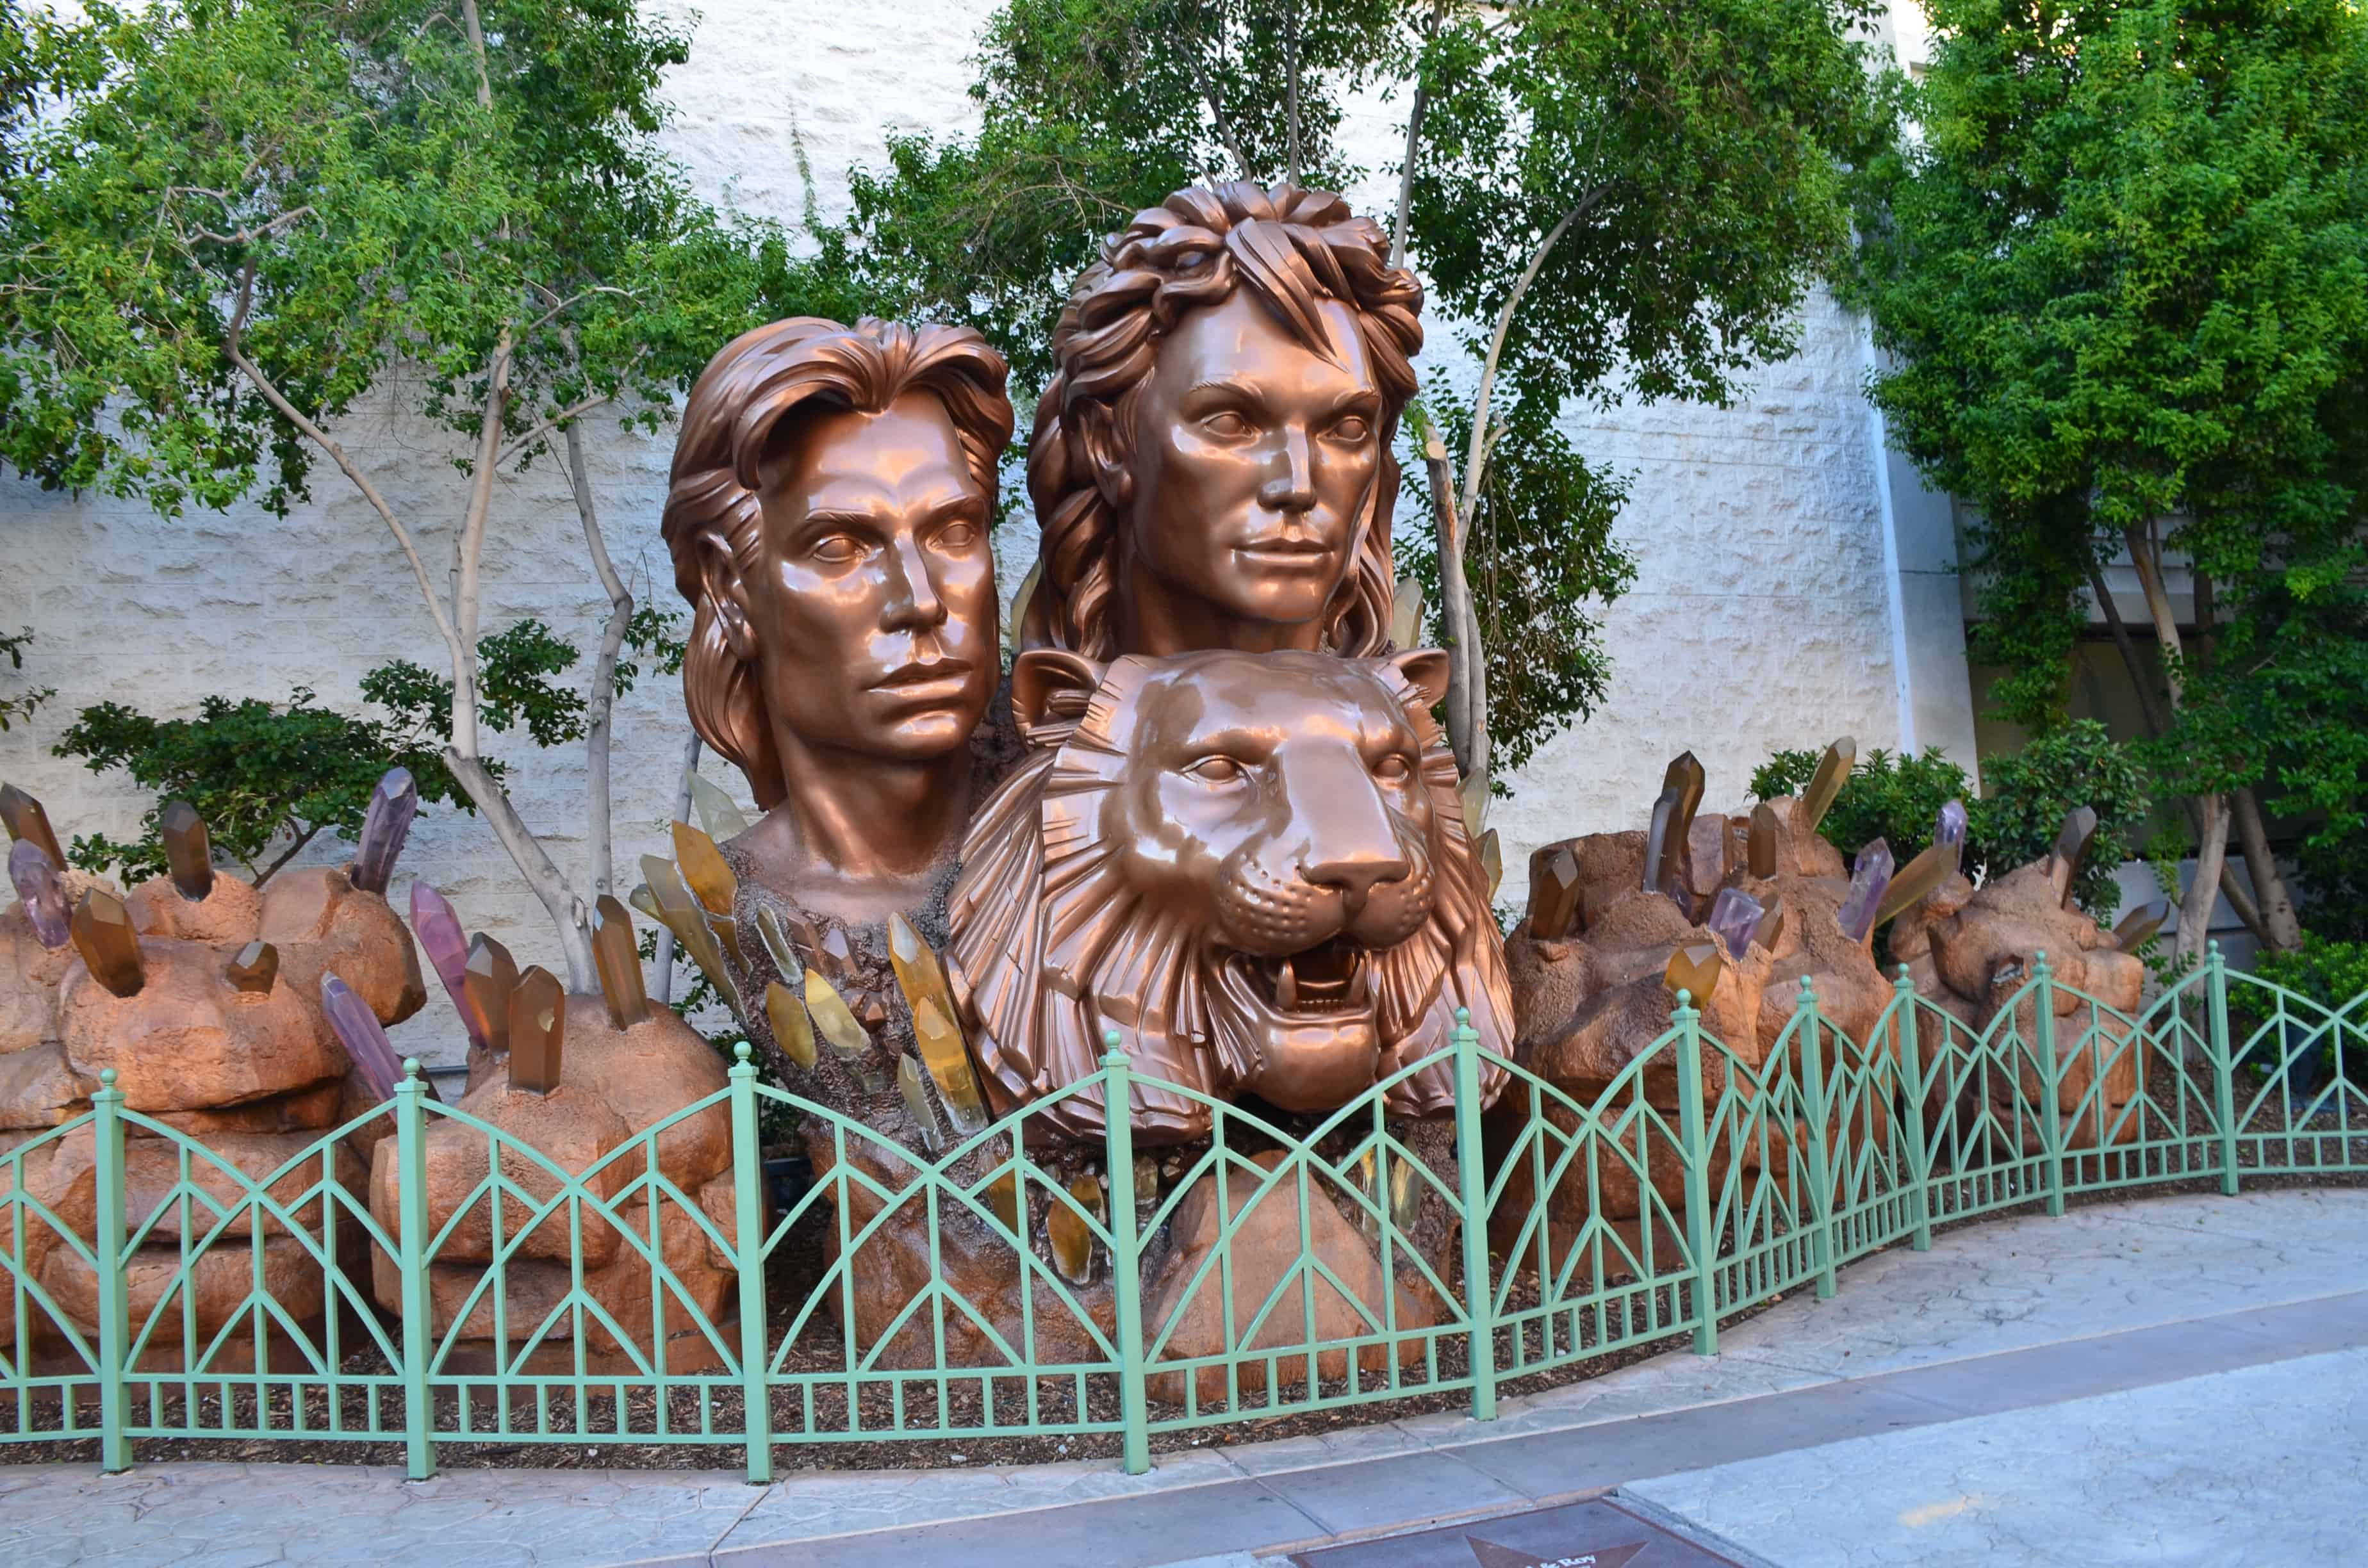 Siegfried and Roy monument at the Mirage in Las Vegas, Nevada